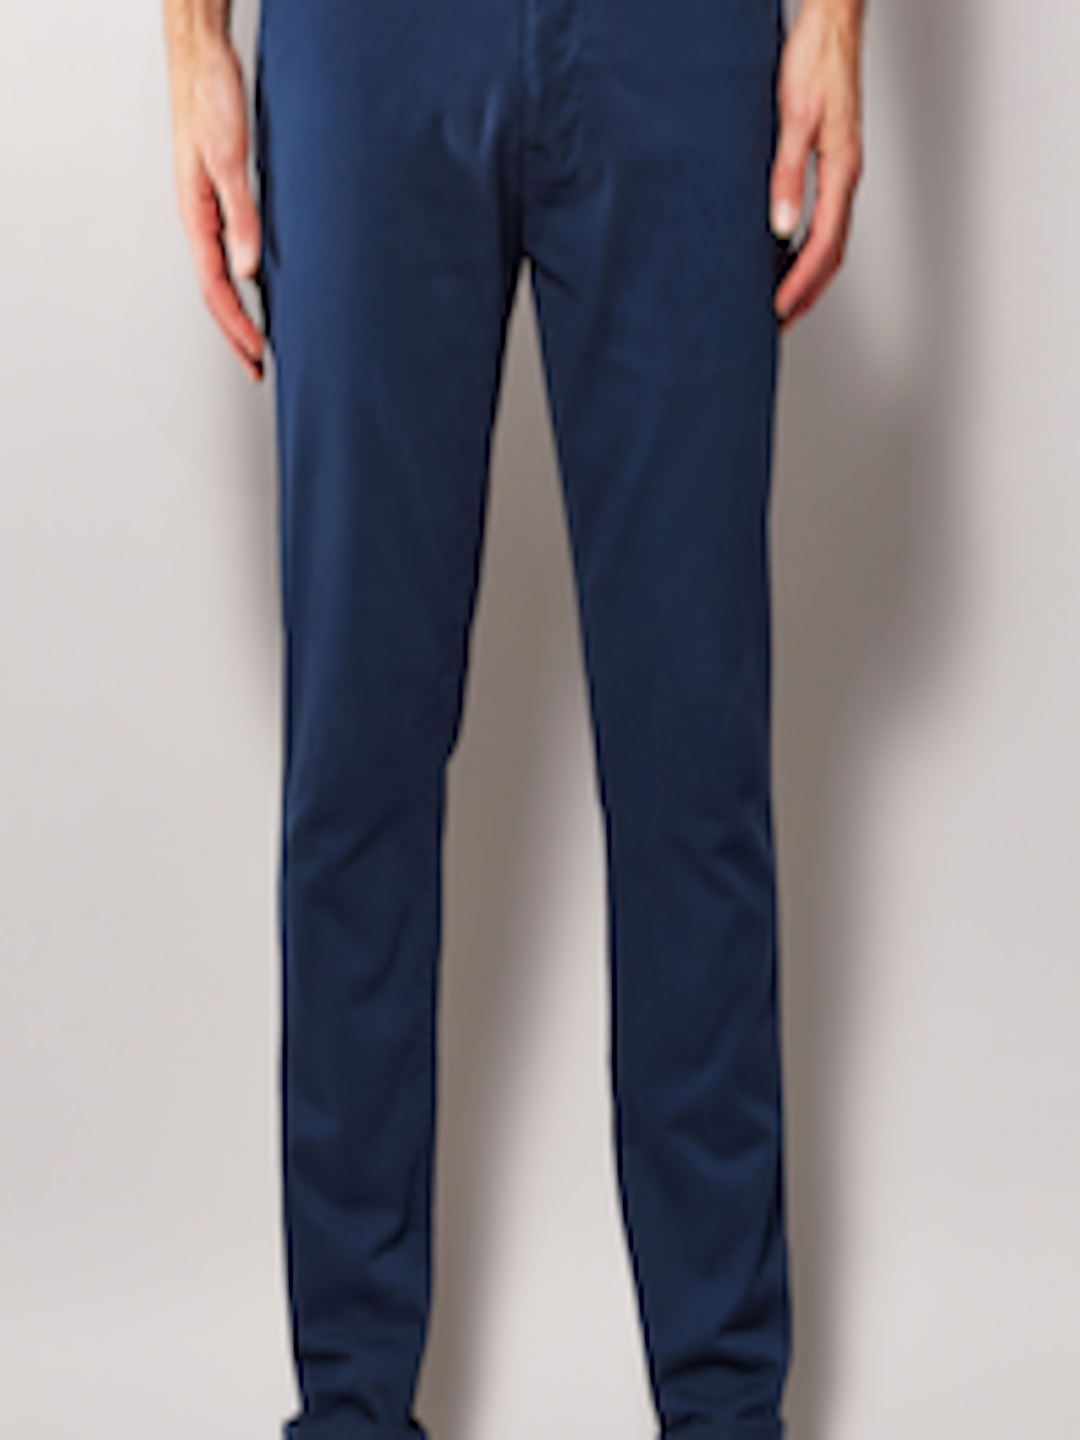 Buy Next Men Navy Blue Slim Fit Solid Chinos - Trousers for Men 7643067 ...